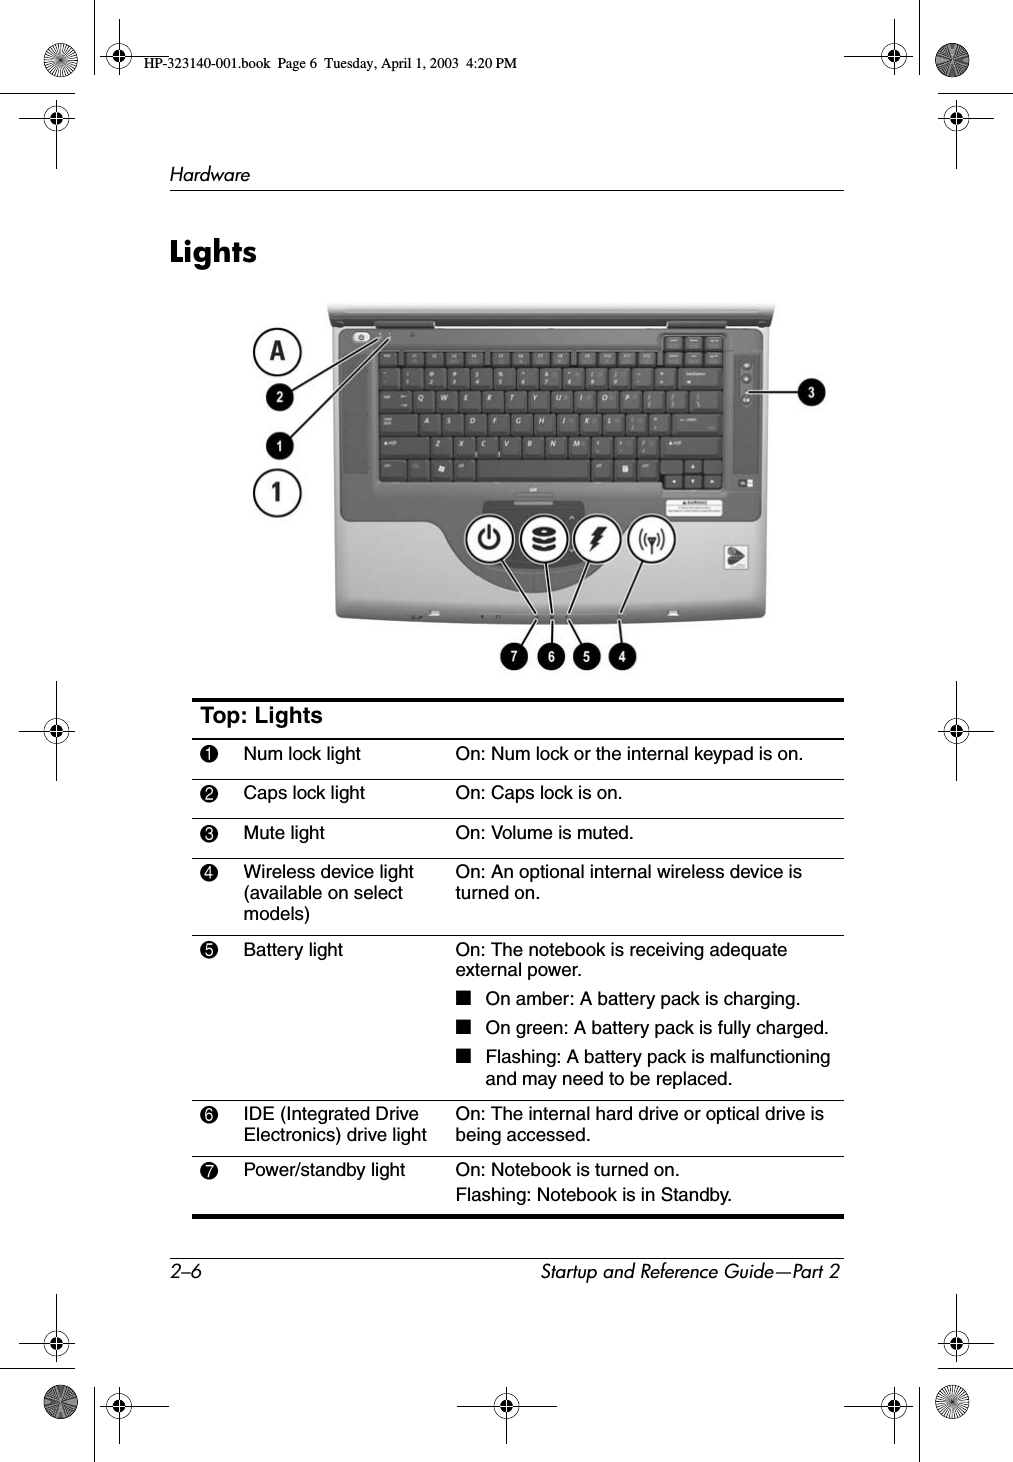 2–6 Startup and Reference Guide—Part 2HardwareLightsTop: Lights1Num lock light On: Num lock or the internal keypad is on.2Caps lock light On: Caps lock is on.3Mute light On: Volume is muted.4Wireless device light (available on select models)On: An optional internal wireless device is turned on.5Battery light On: The notebook is receiving adequate external power.■On amber: A battery pack is charging.■On green: A battery pack is fully charged.■Flashing: A battery pack is malfunctioning and may need to be replaced.6IDE (Integrated Drive Electronics) drive lightOn: The internal hard drive or optical drive is being accessed.7Power/standby light On: Notebook is turned on.Flashing: Notebook is in Standby.HP-323140-001.book  Page 6  Tuesday, April 1, 2003  4:20 PM